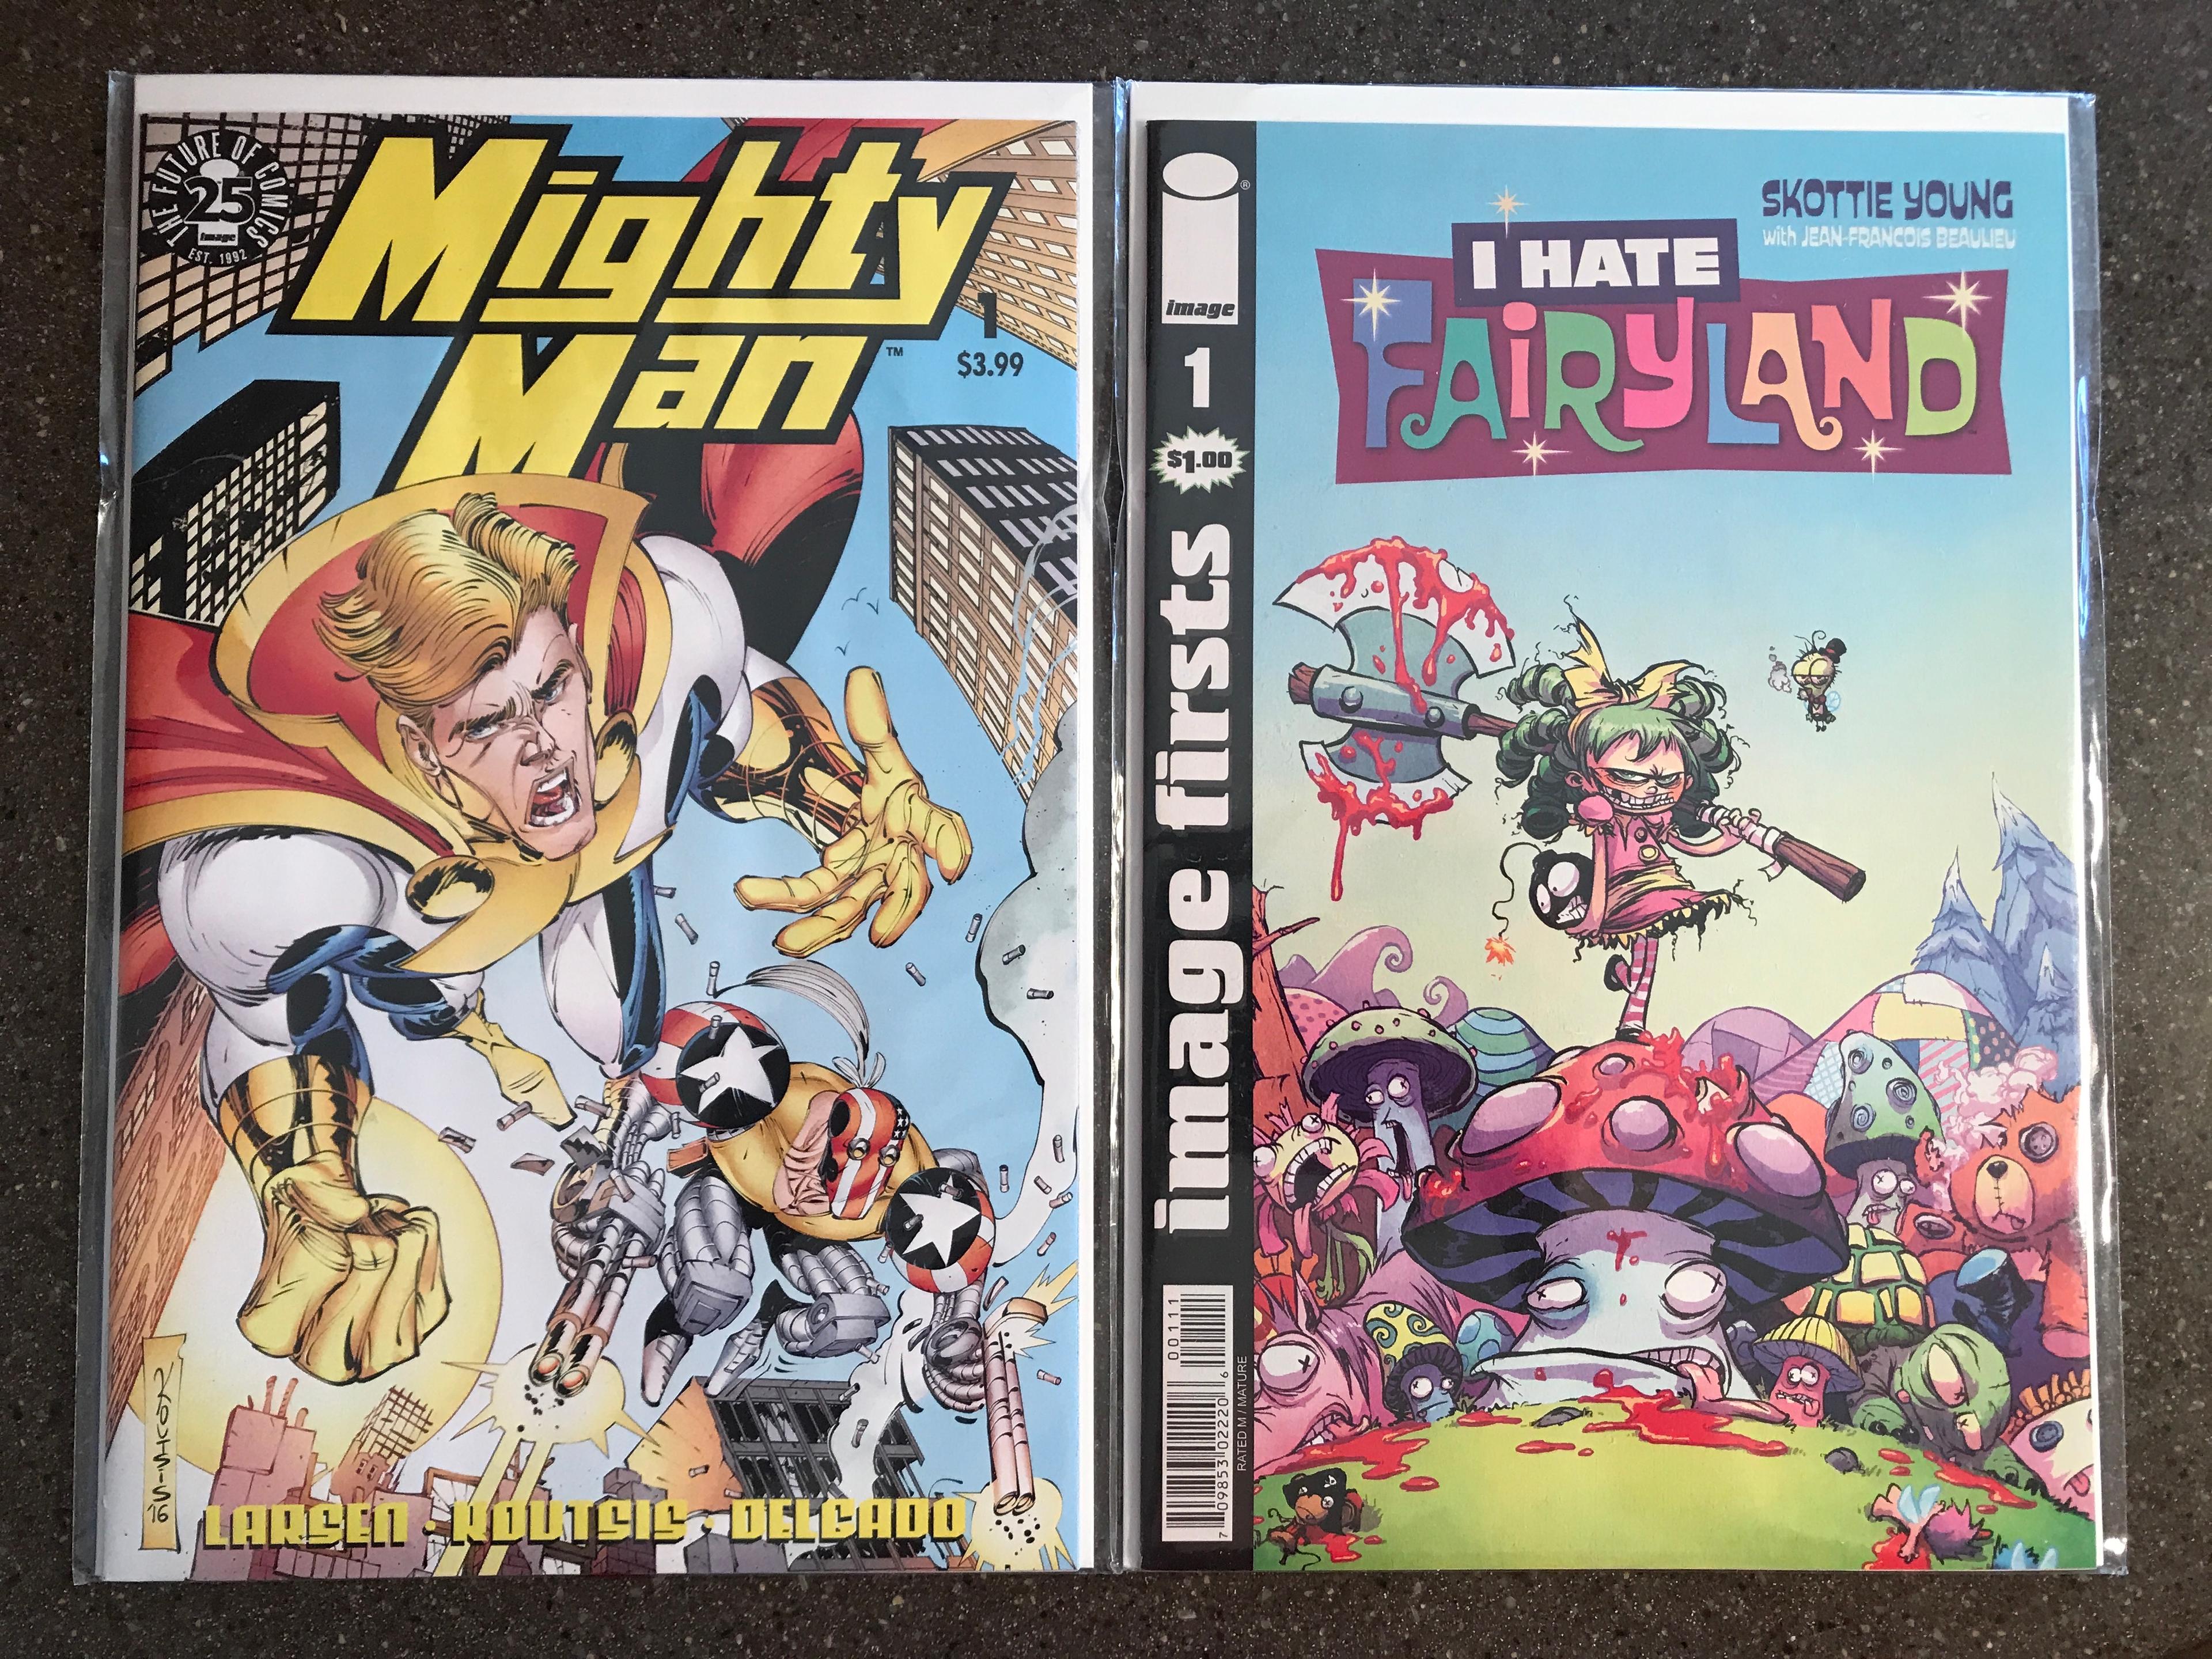 2 Issues I hate Fairyland Comic #1 & Mighty Man Comic #1 Image KEY 1st Issues